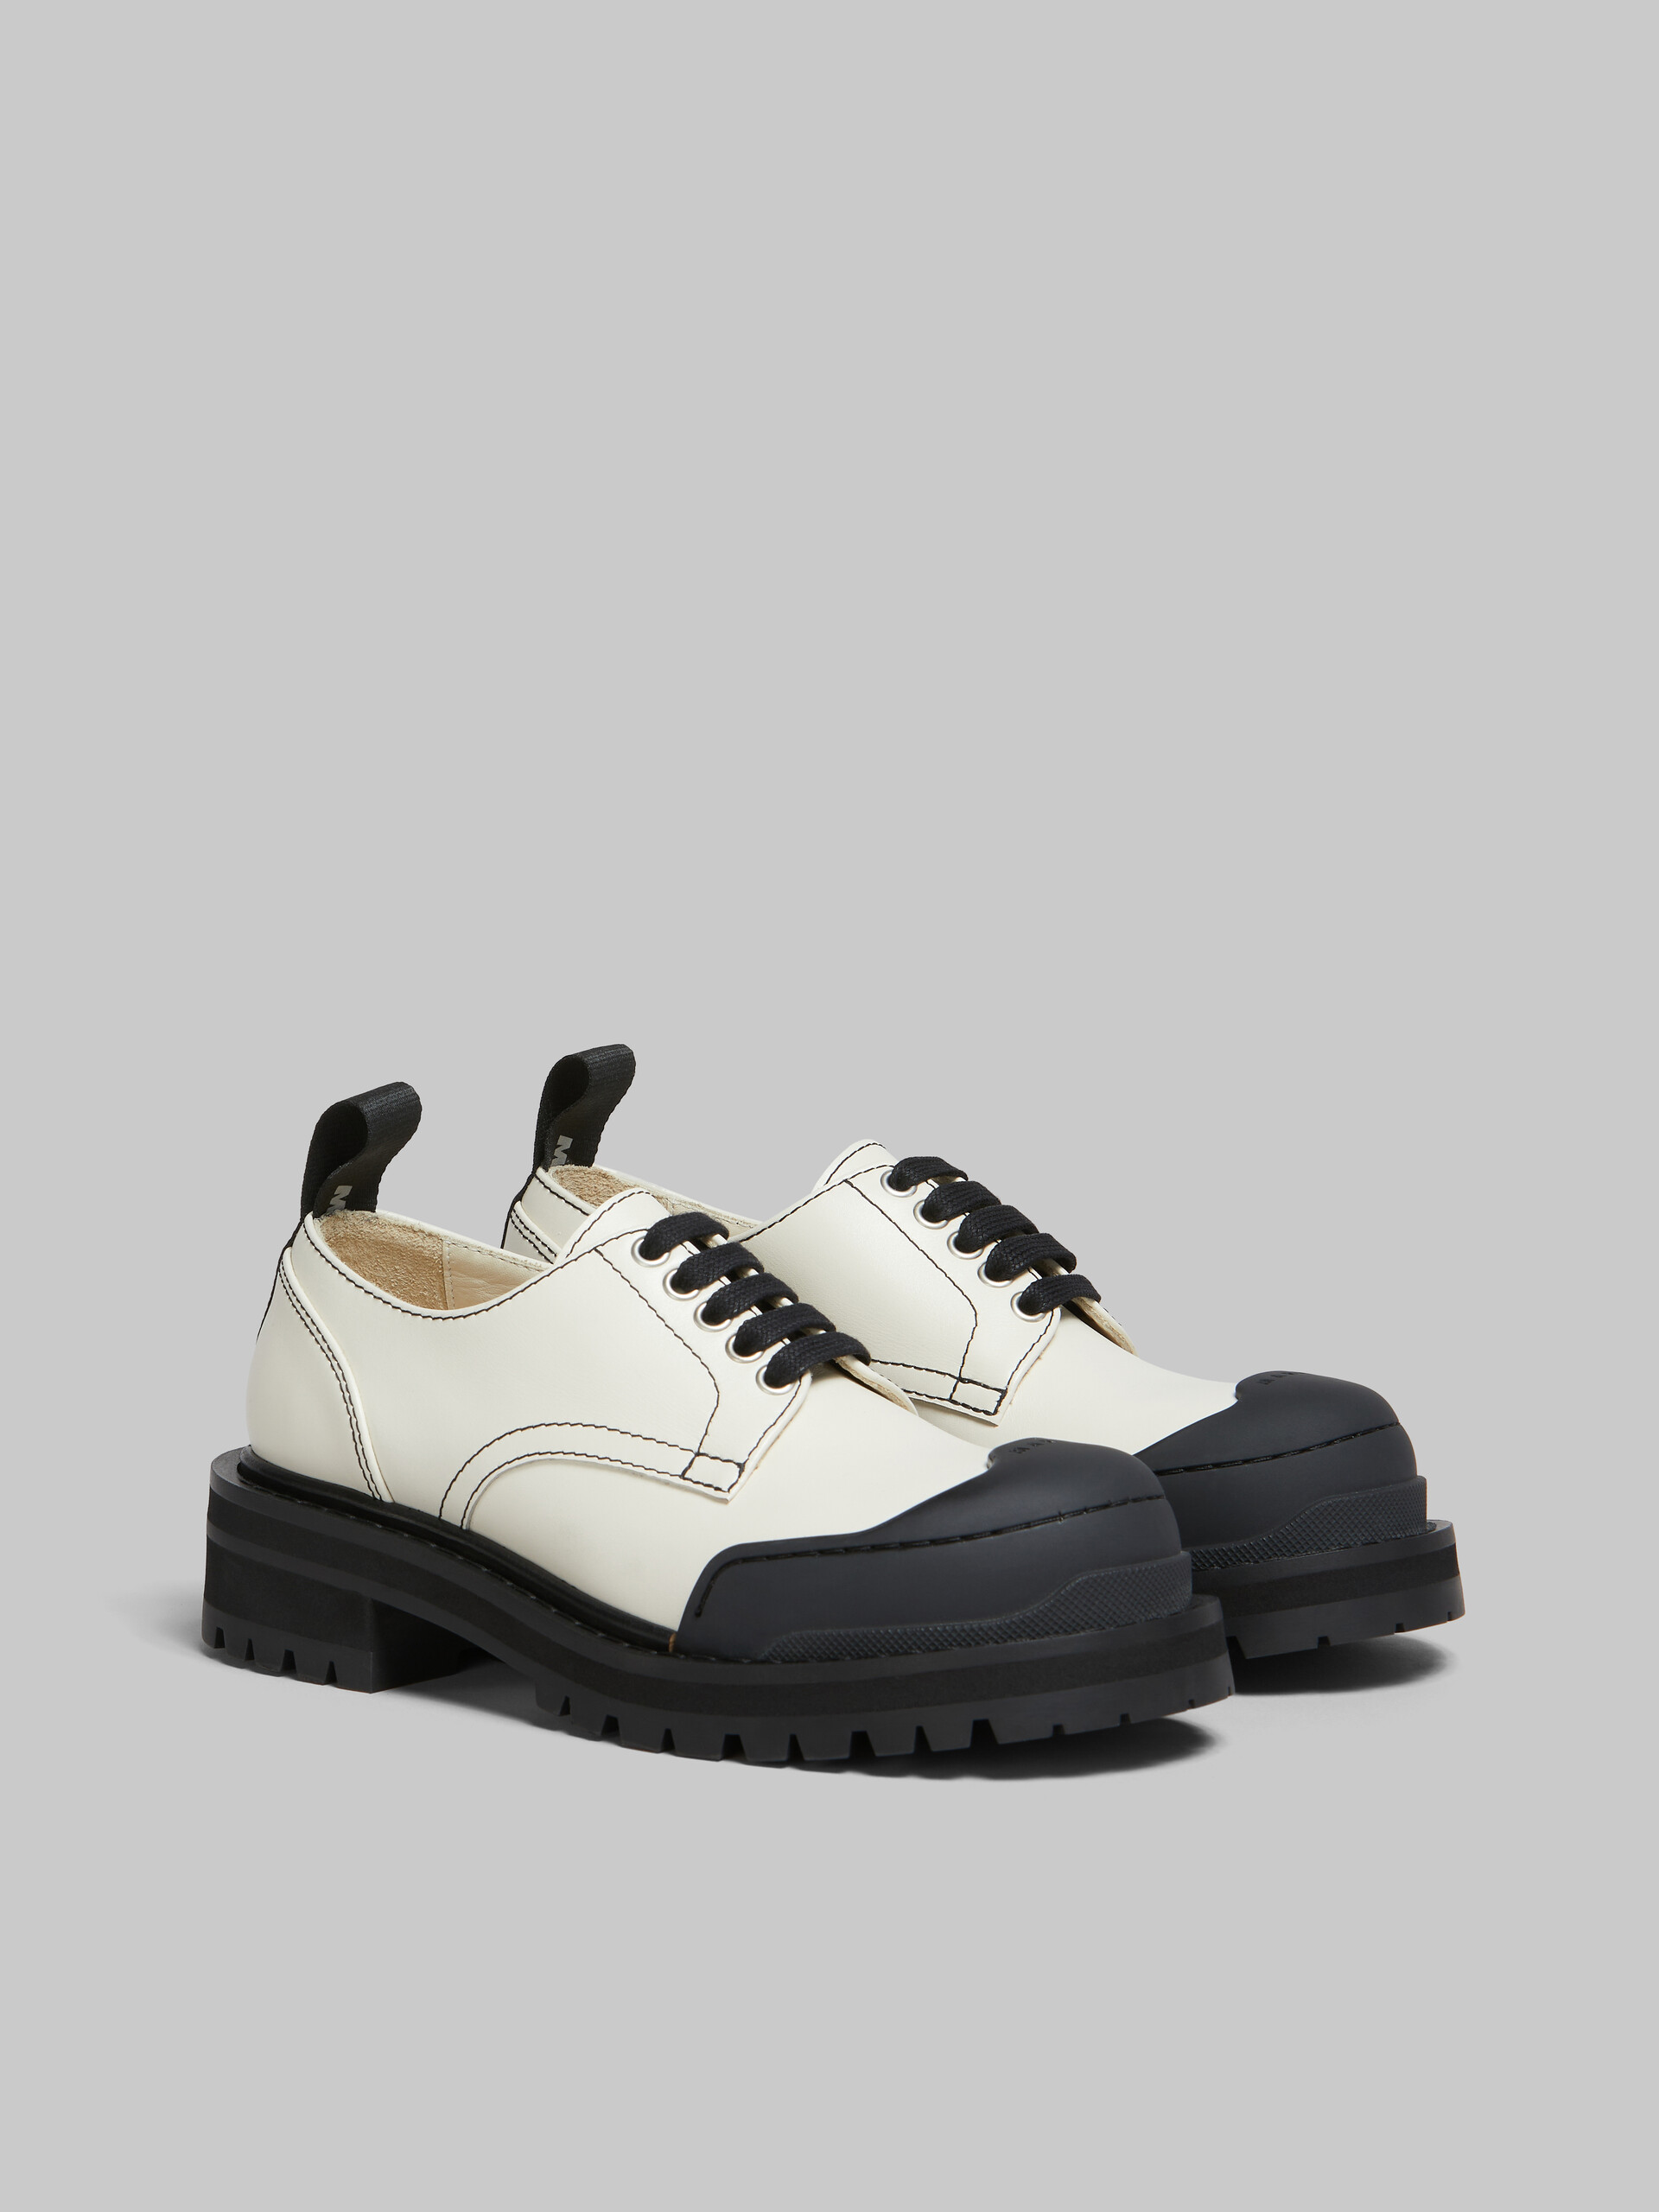 White leather Dada Army derby shoe - Lace-ups - Image 2